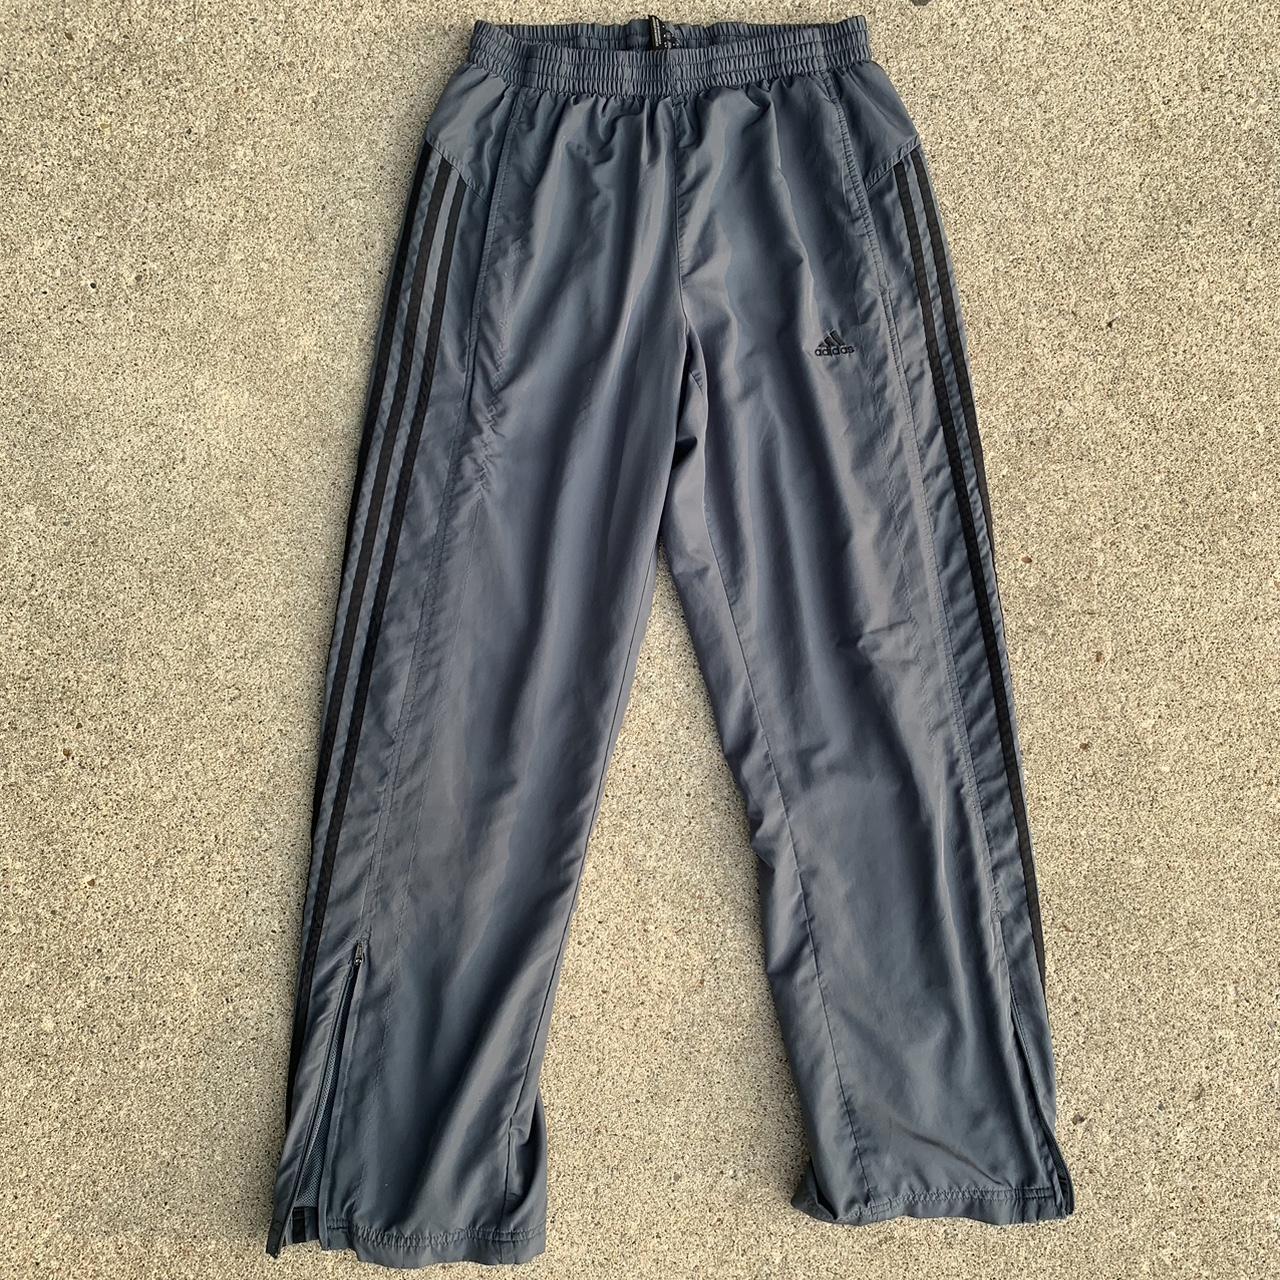 Adidas Men's Black and Grey Trousers | Depop